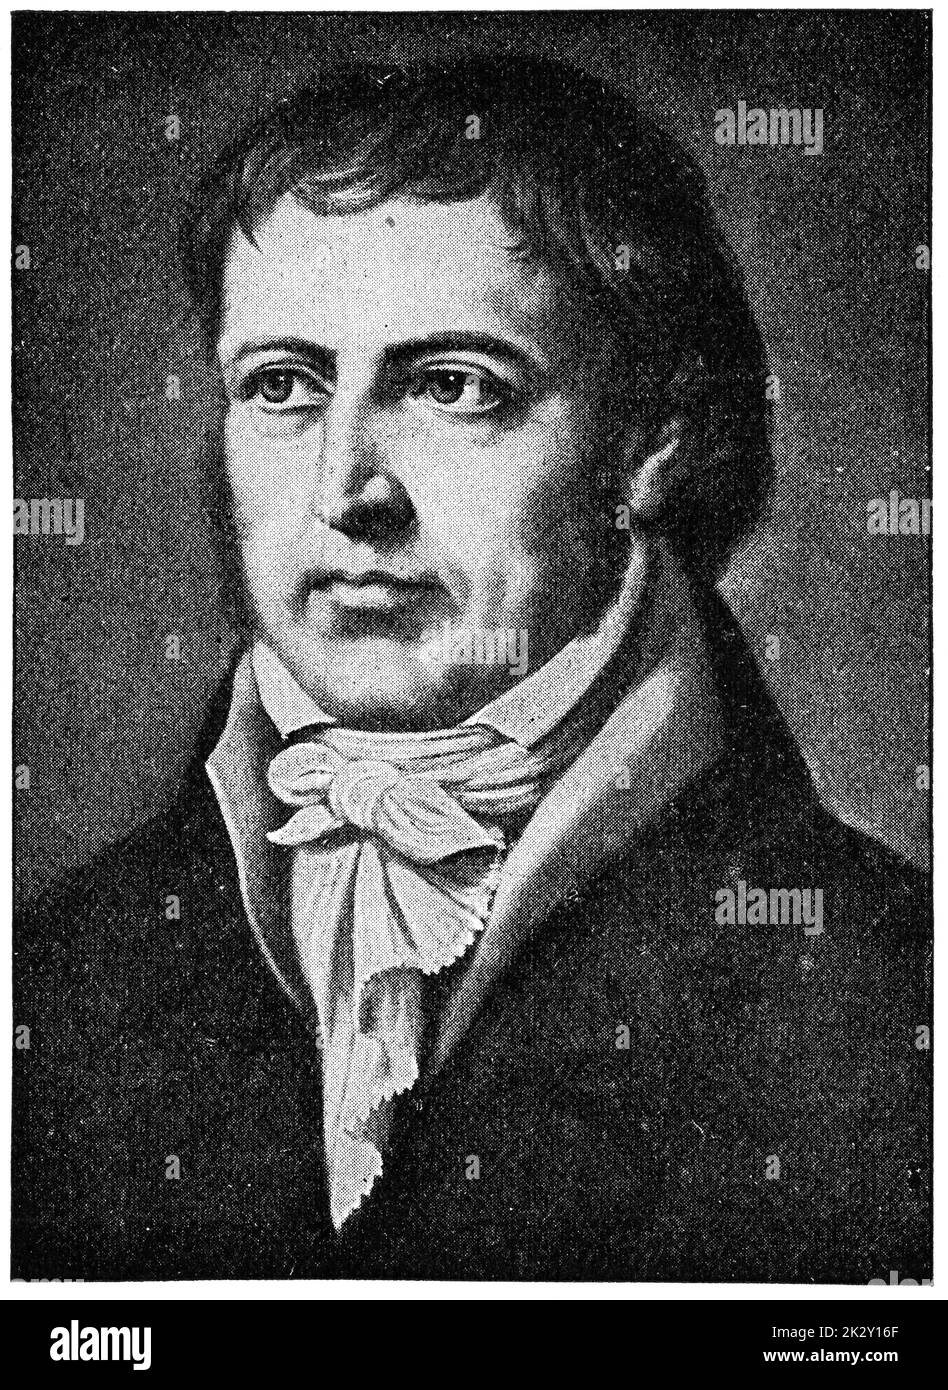 Portrait of Georg Wilhelm Friedrich Hegel - a German philosopher and the most important figure in German idealism. Illustration of the 19th century. Germany. White background. Stock Photo